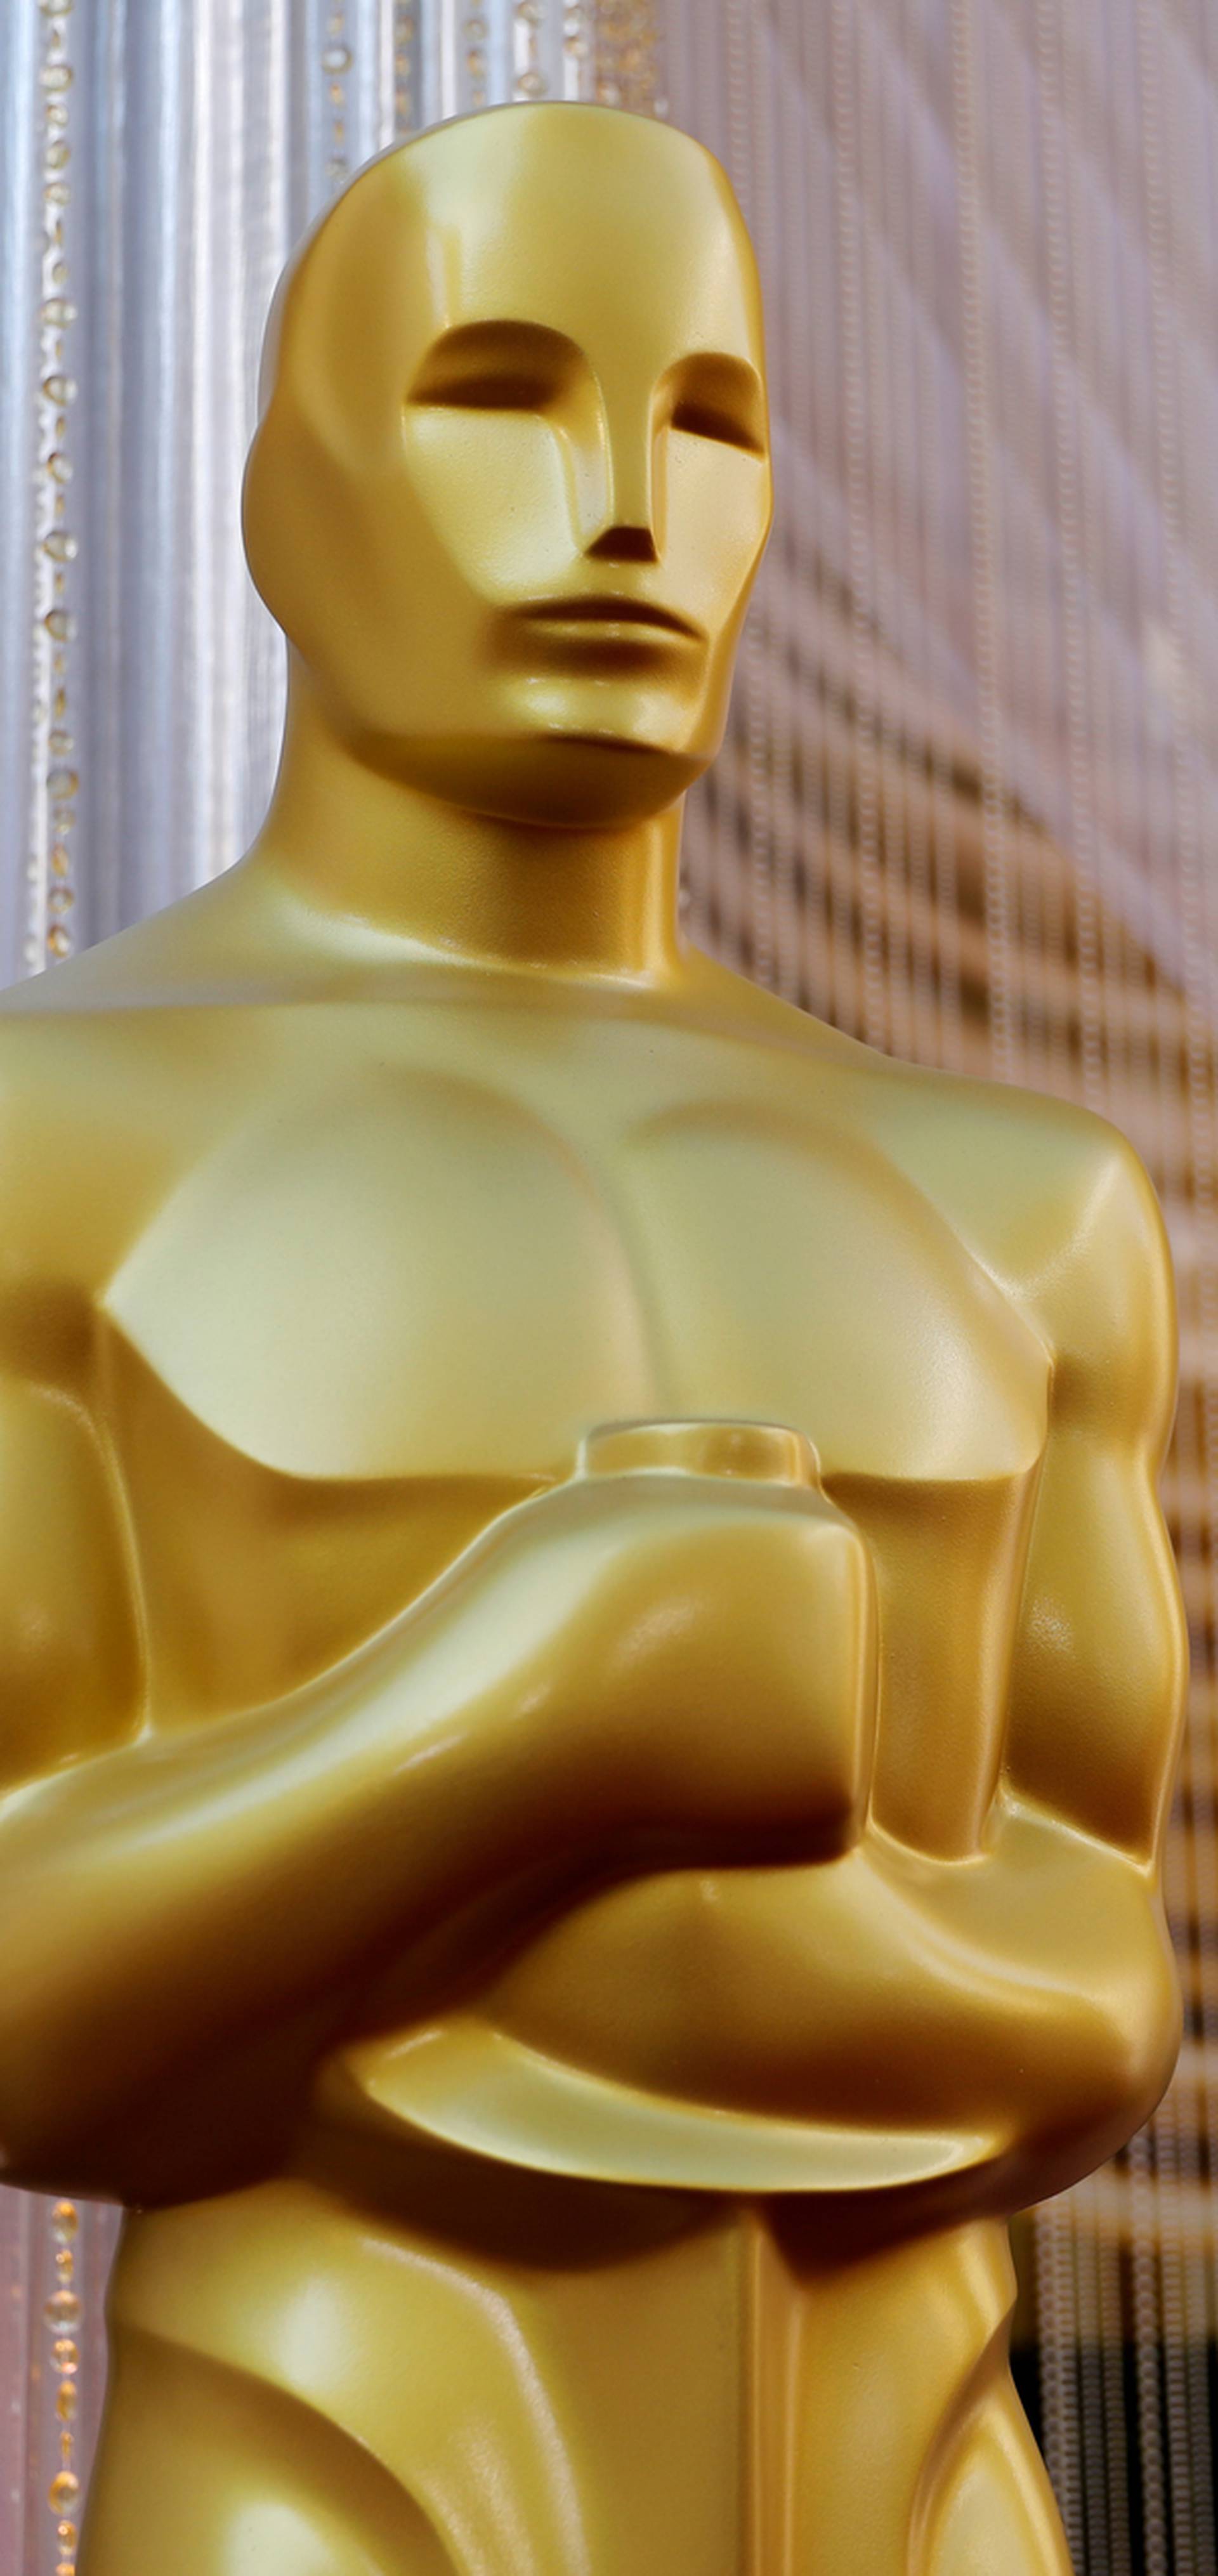 An Oscar statue stands along the red carpet arrivals area in preparation for the 92nd Academy Awards in Los Angeles